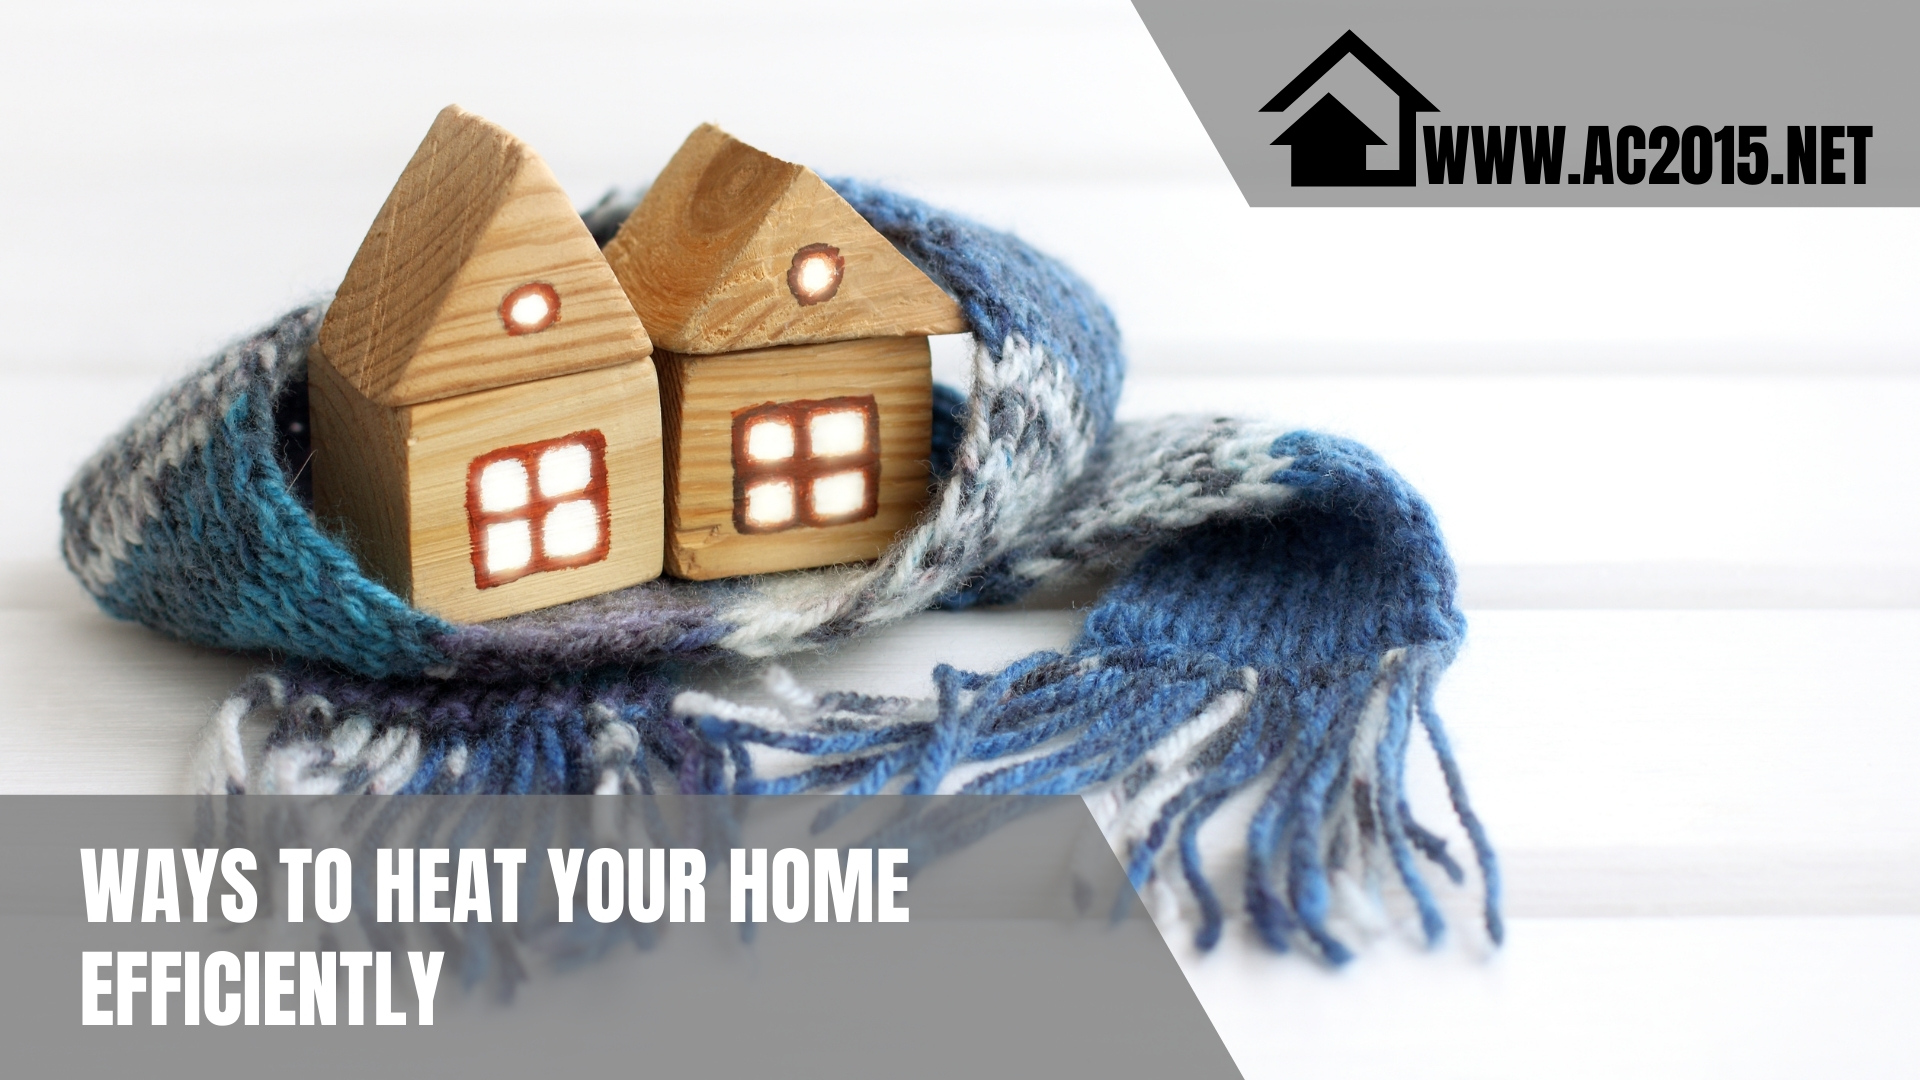 Ways to Heat Your Home Efficiently